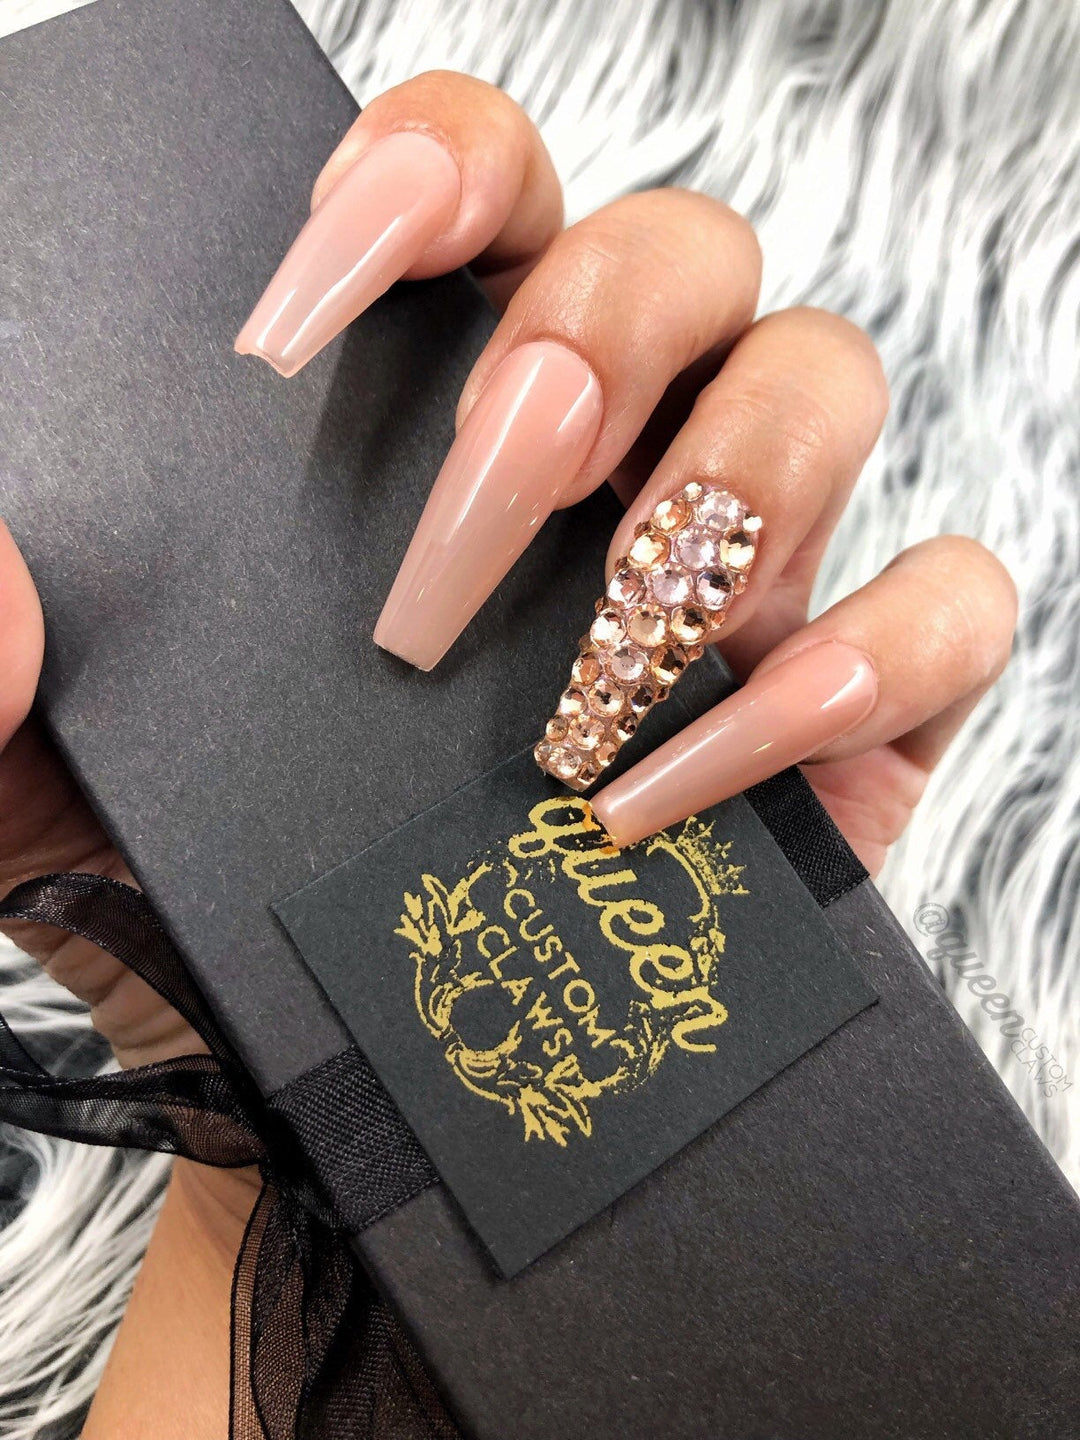 Black and Rose Gold Nails with Rhinestones